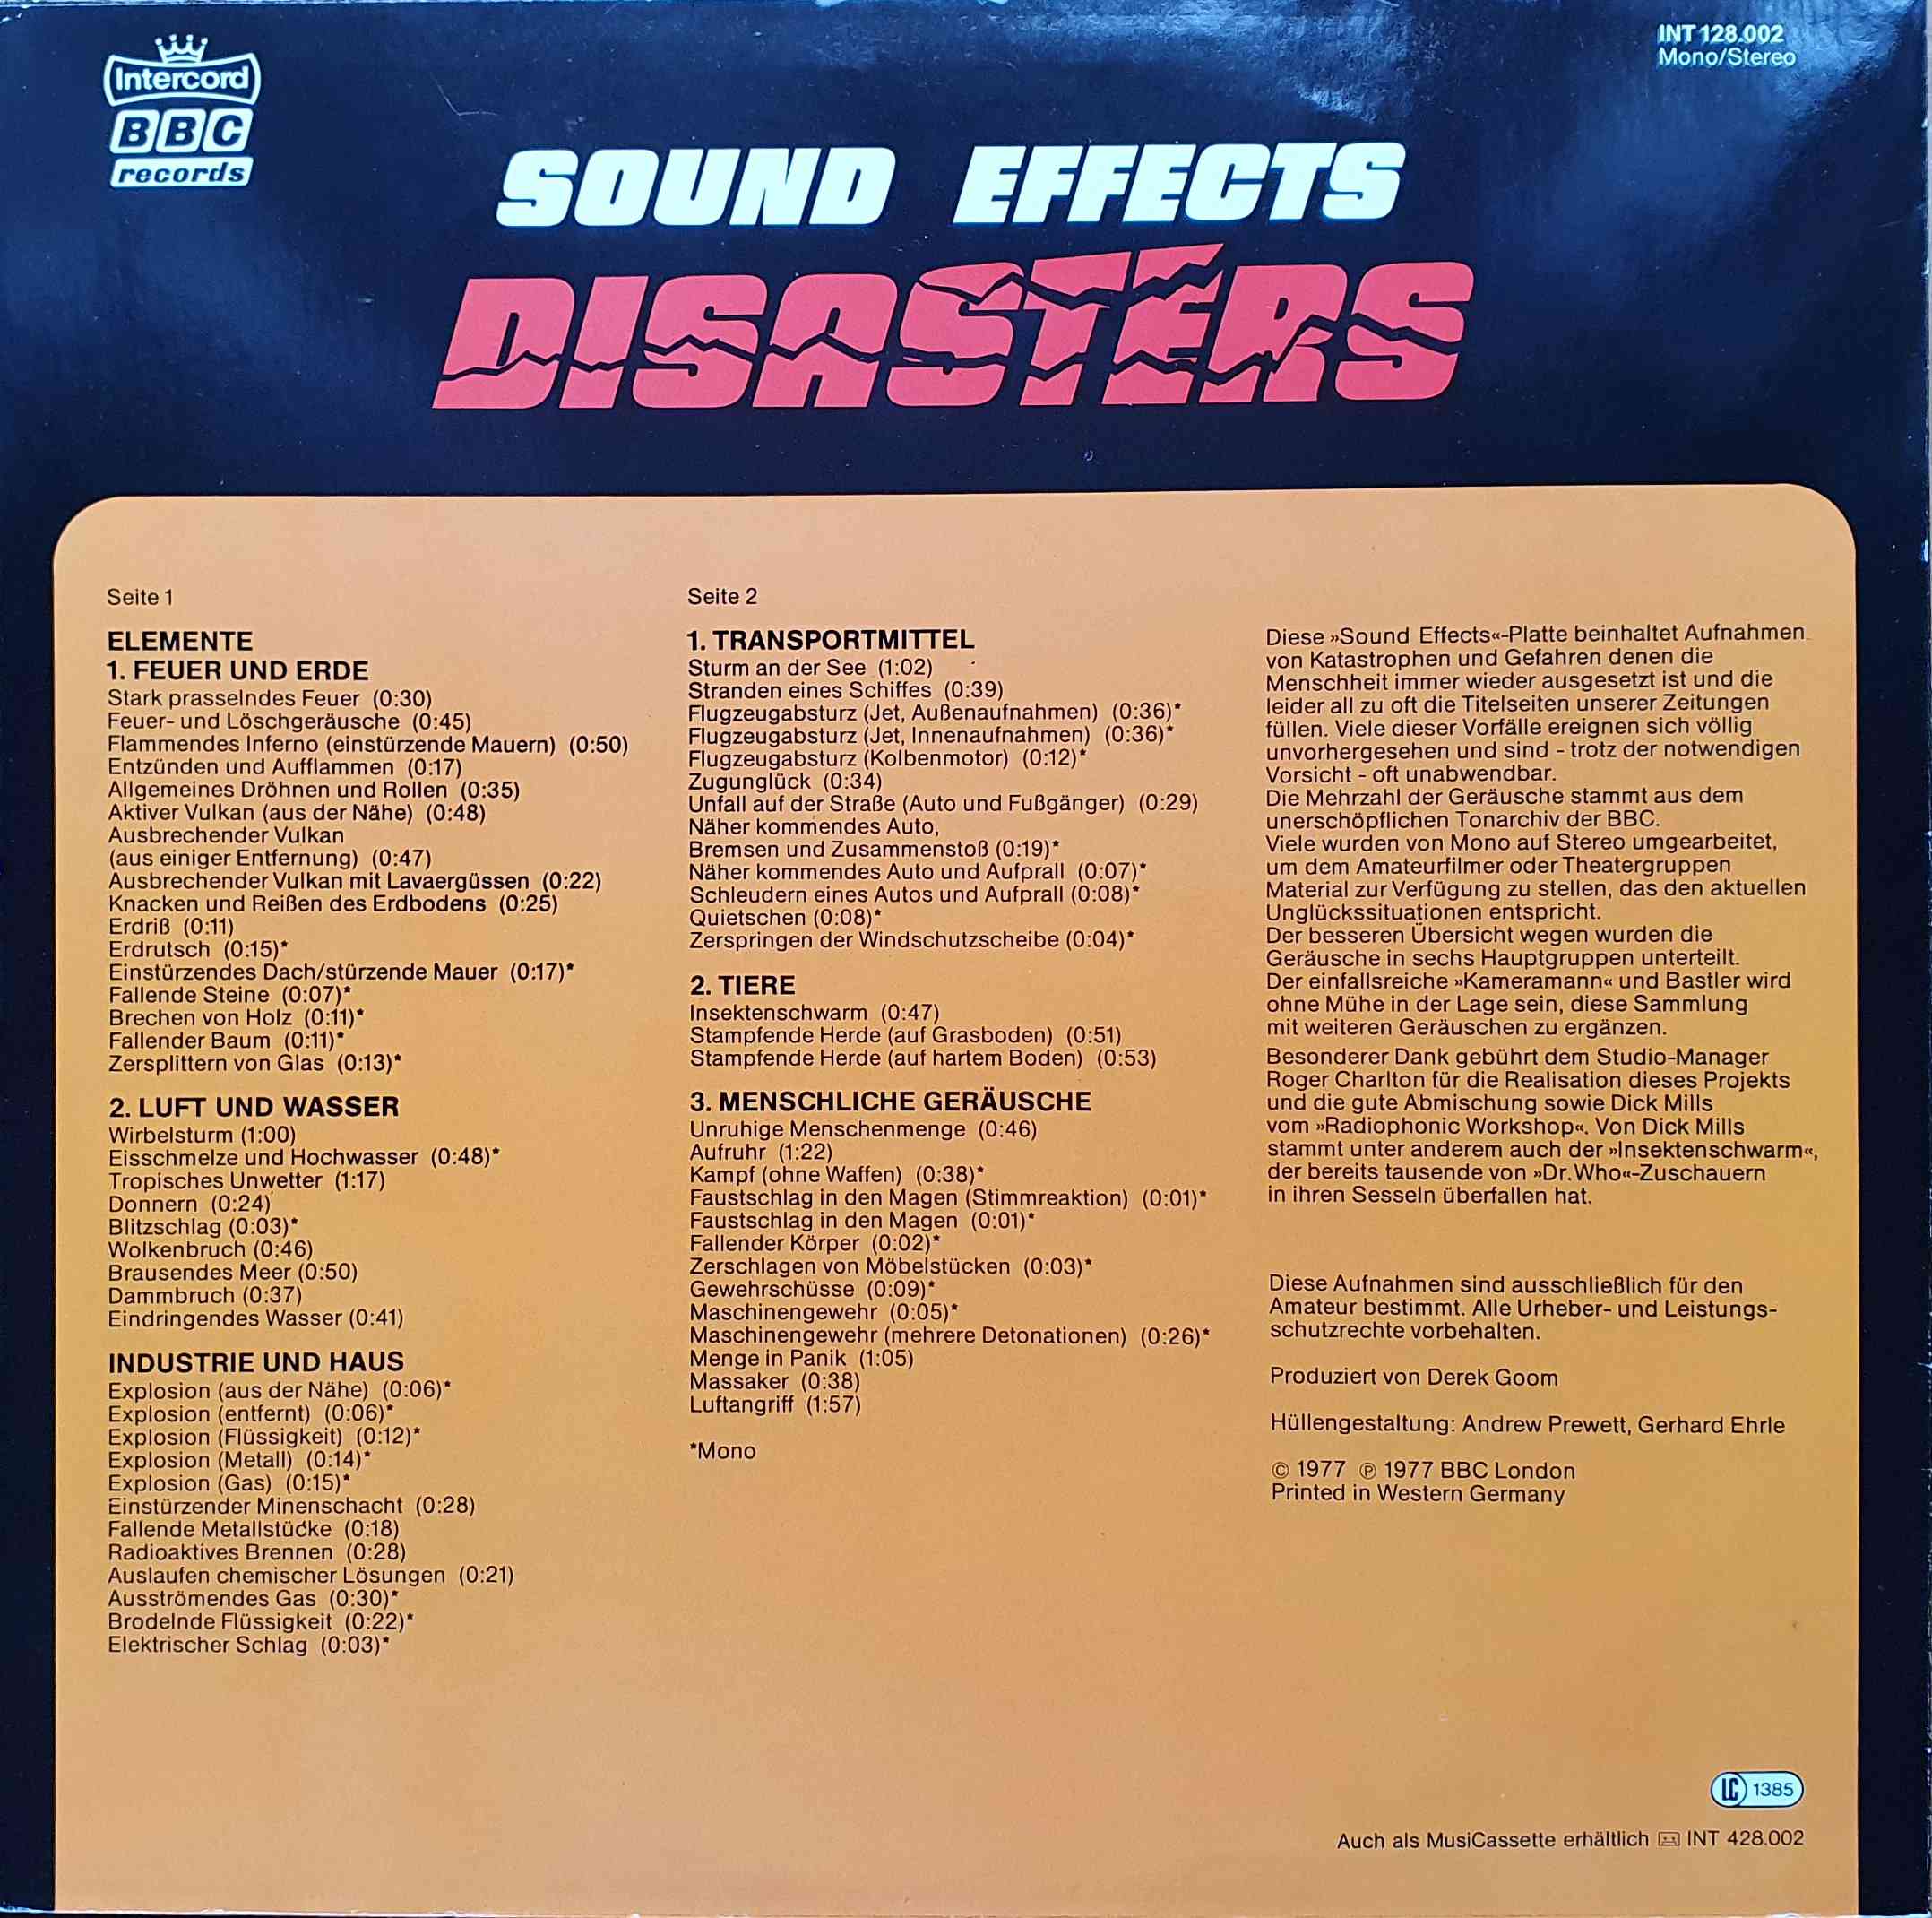 Picture of INT 128.002 Sound effects: Disasters by artist Various from the BBC records and Tapes library